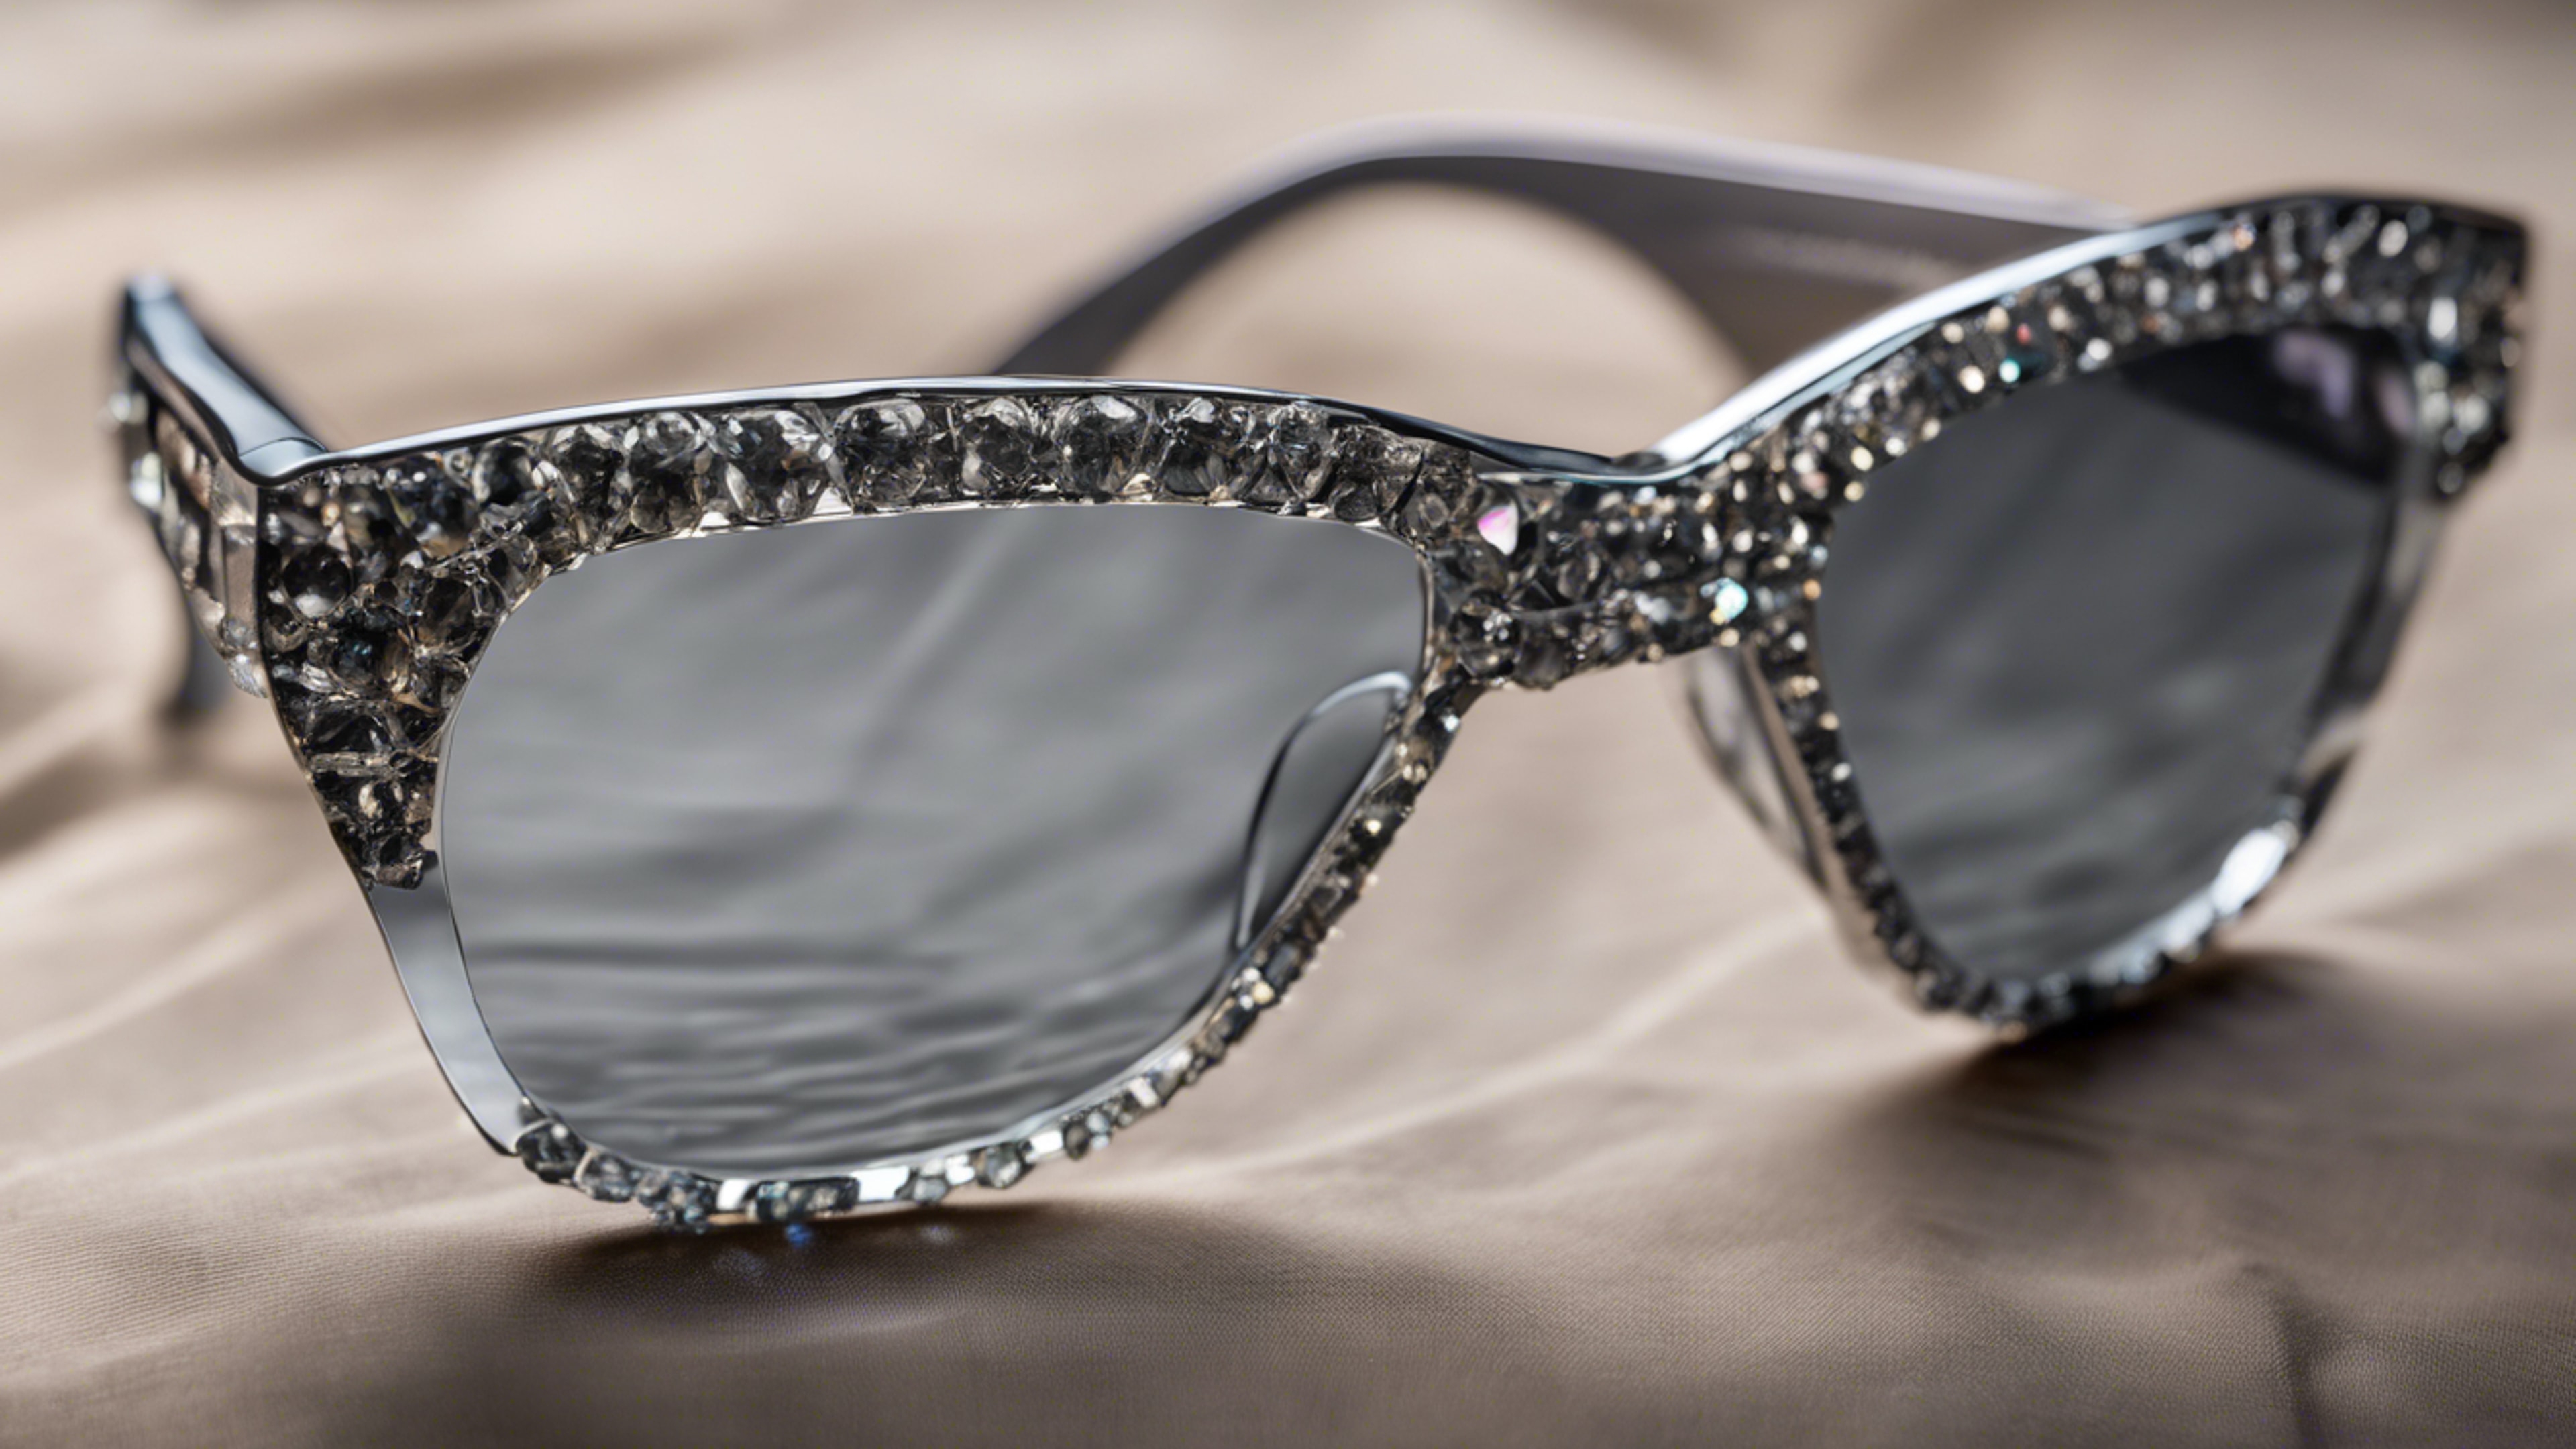 A pair of gray diamond encrusted glasses, epitomizing luxury and status.壁紙[6d0b74d92658455f9dbd]